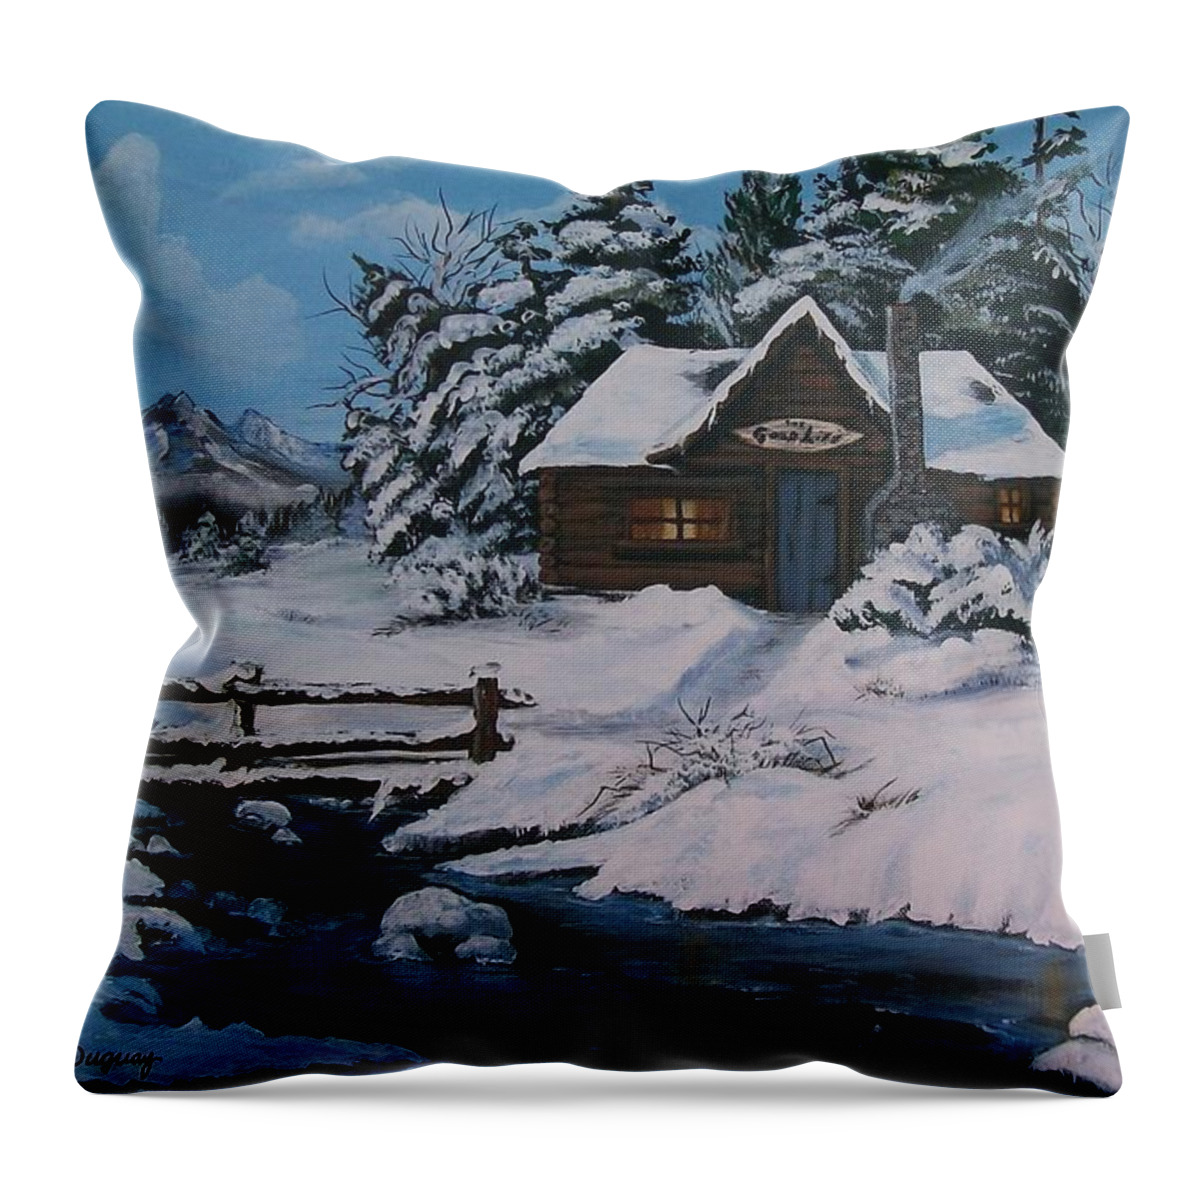 River Throw Pillow featuring the painting The Good Life by Sharon Duguay